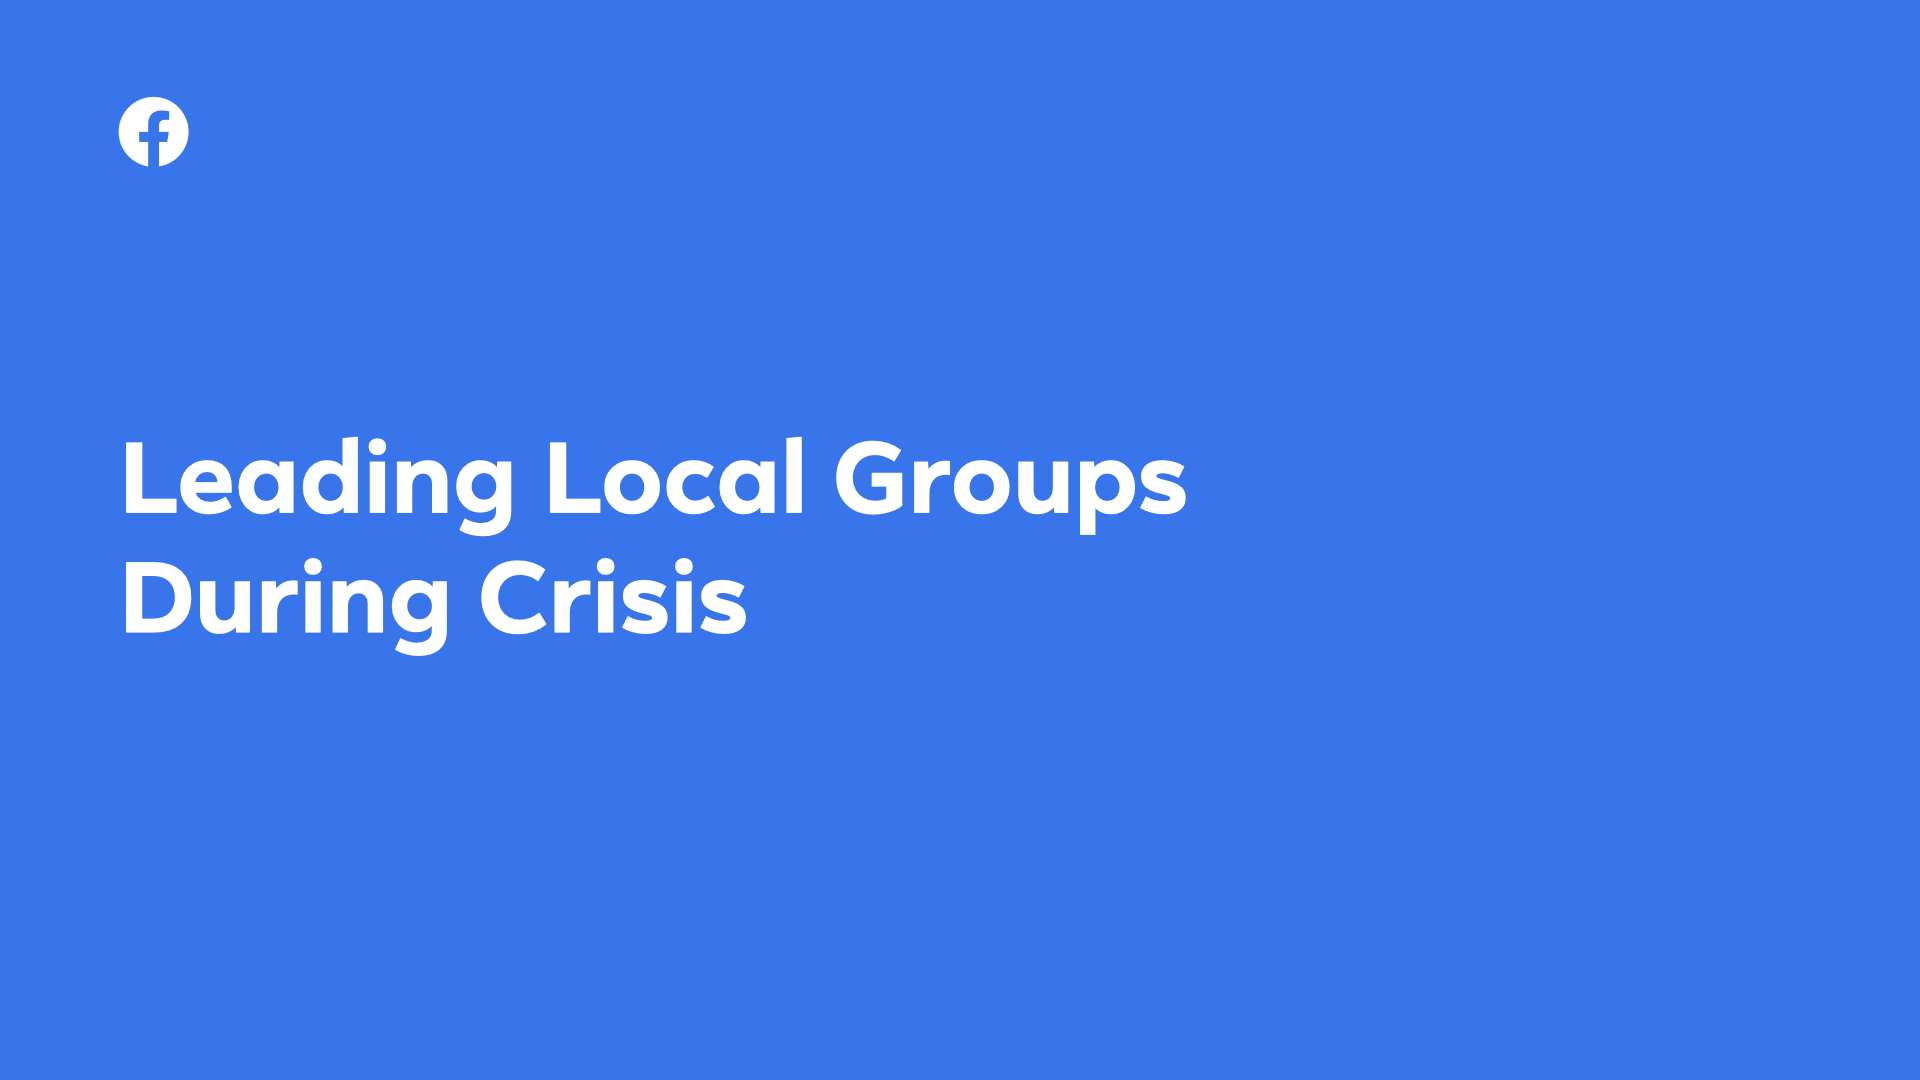 LocalGroups-Playbook.001.png